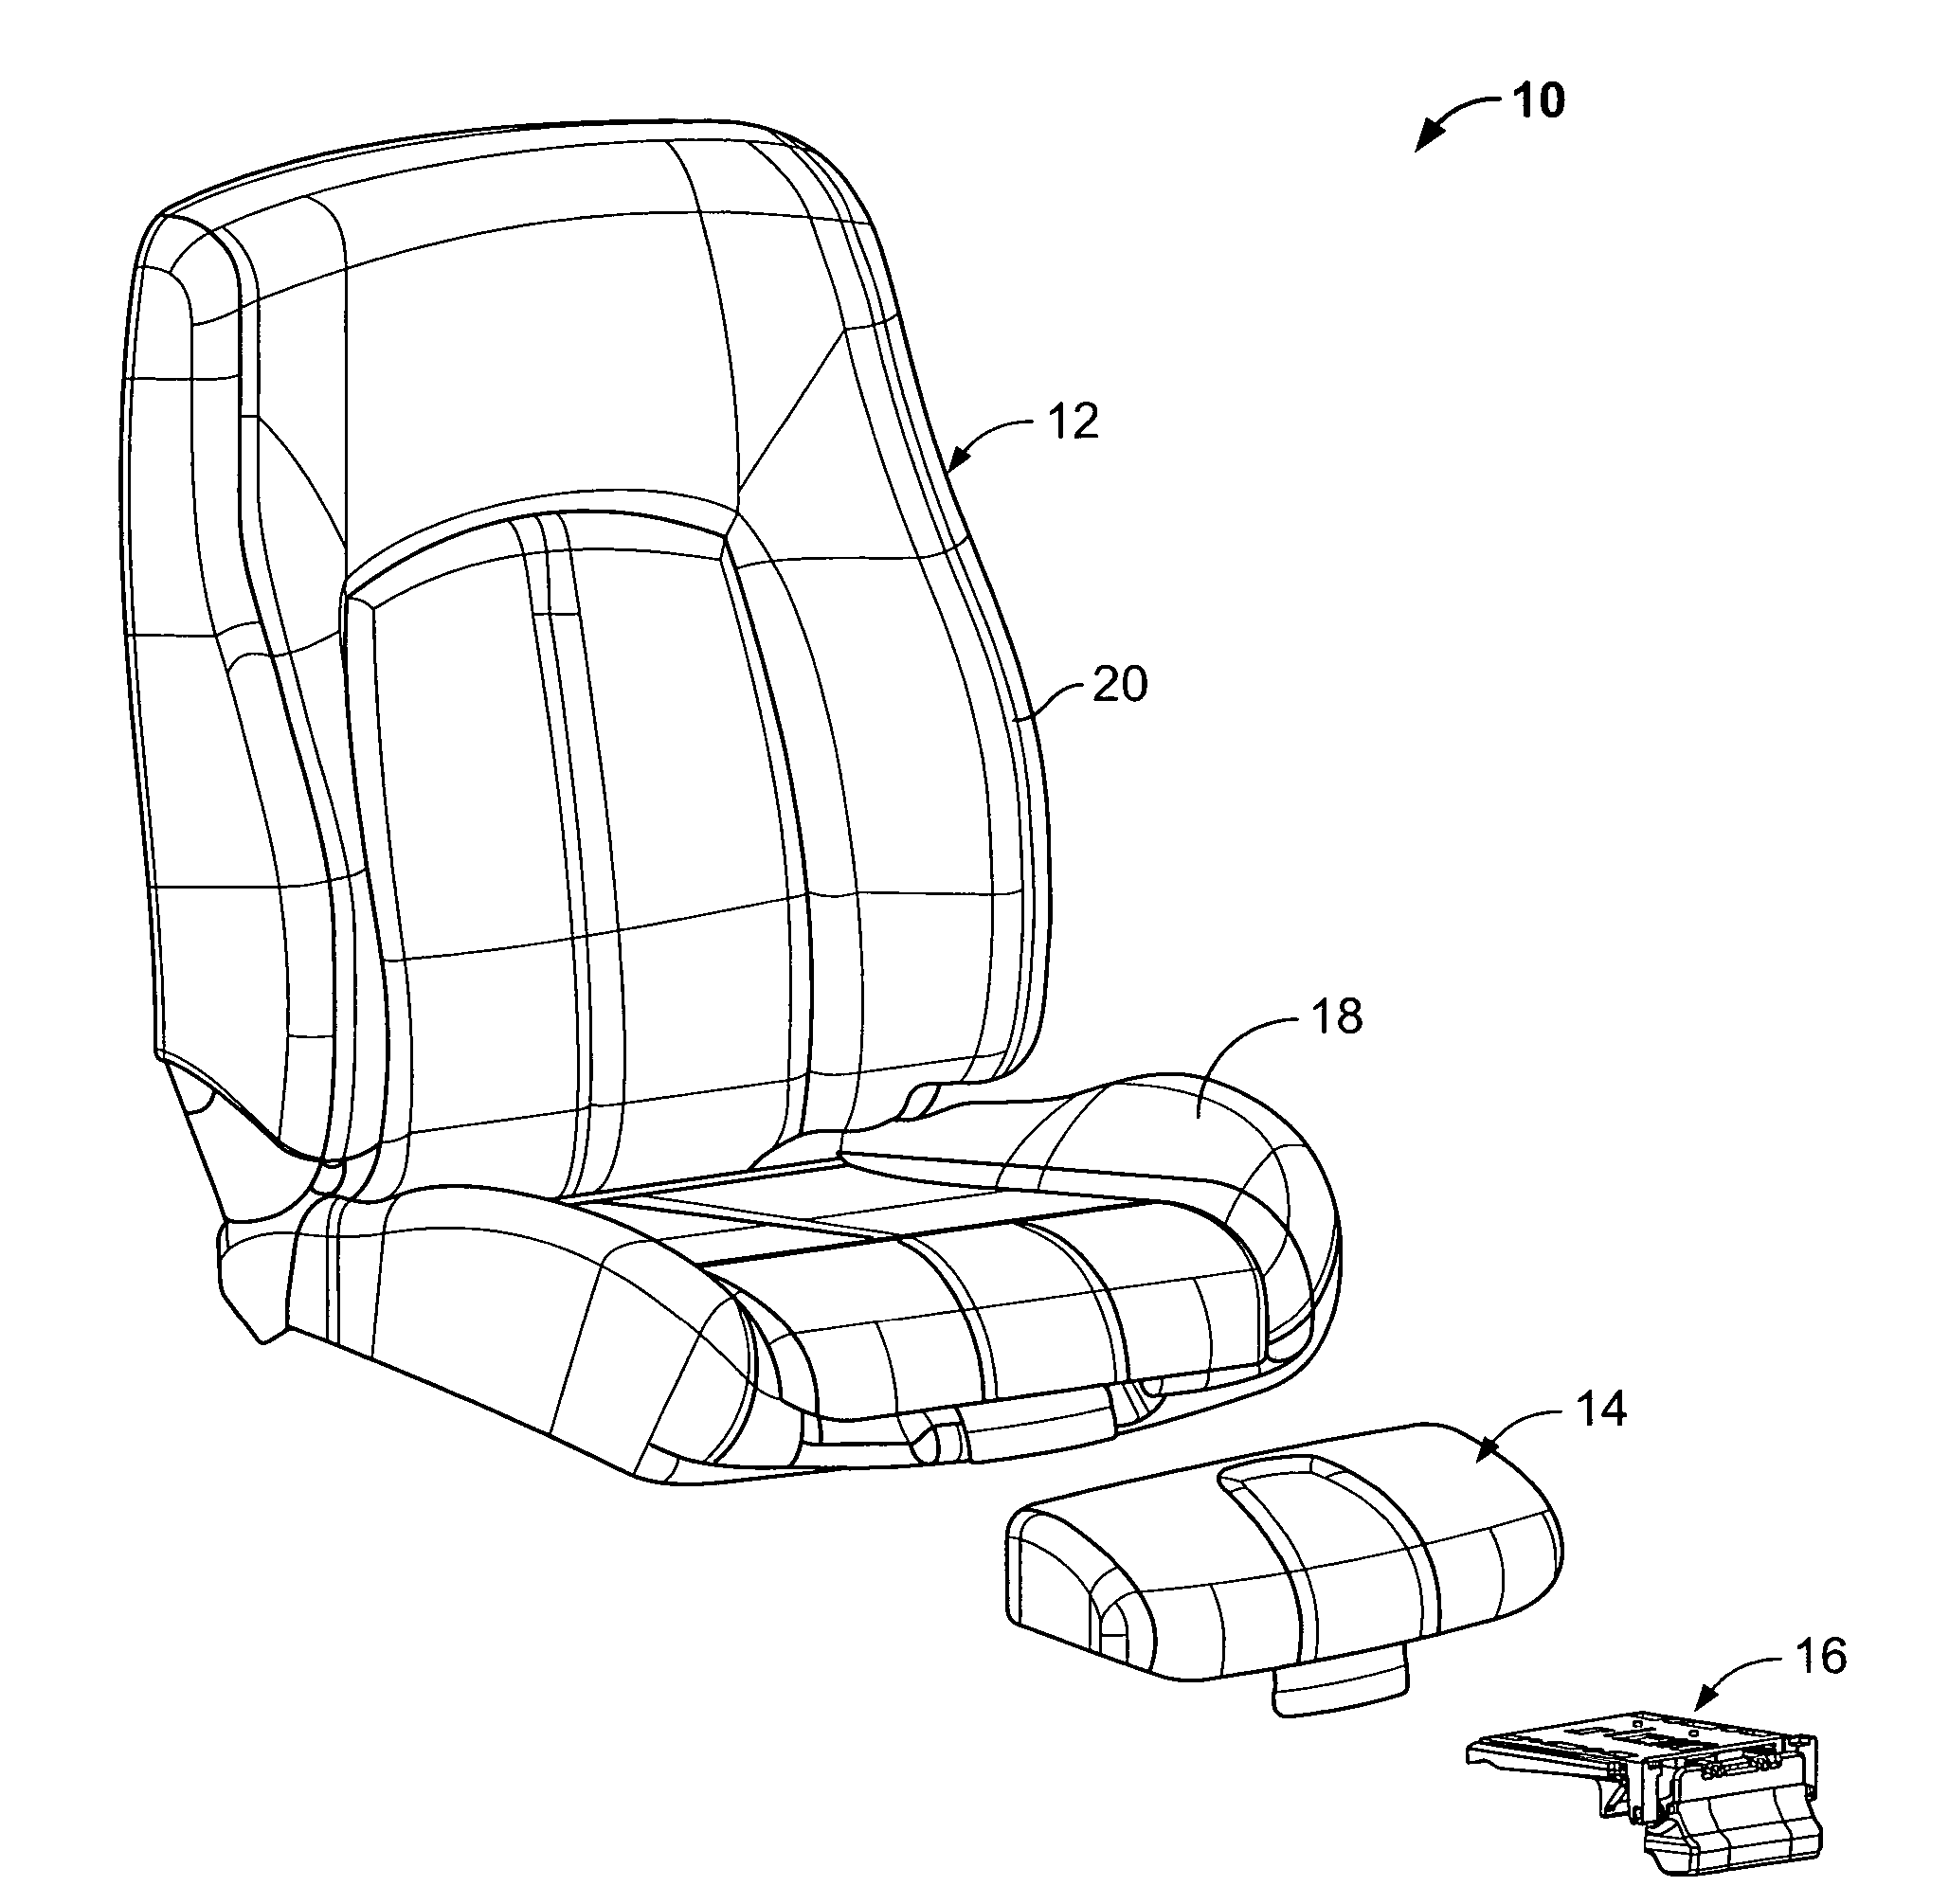 Thigh extension system for a vehicle seat